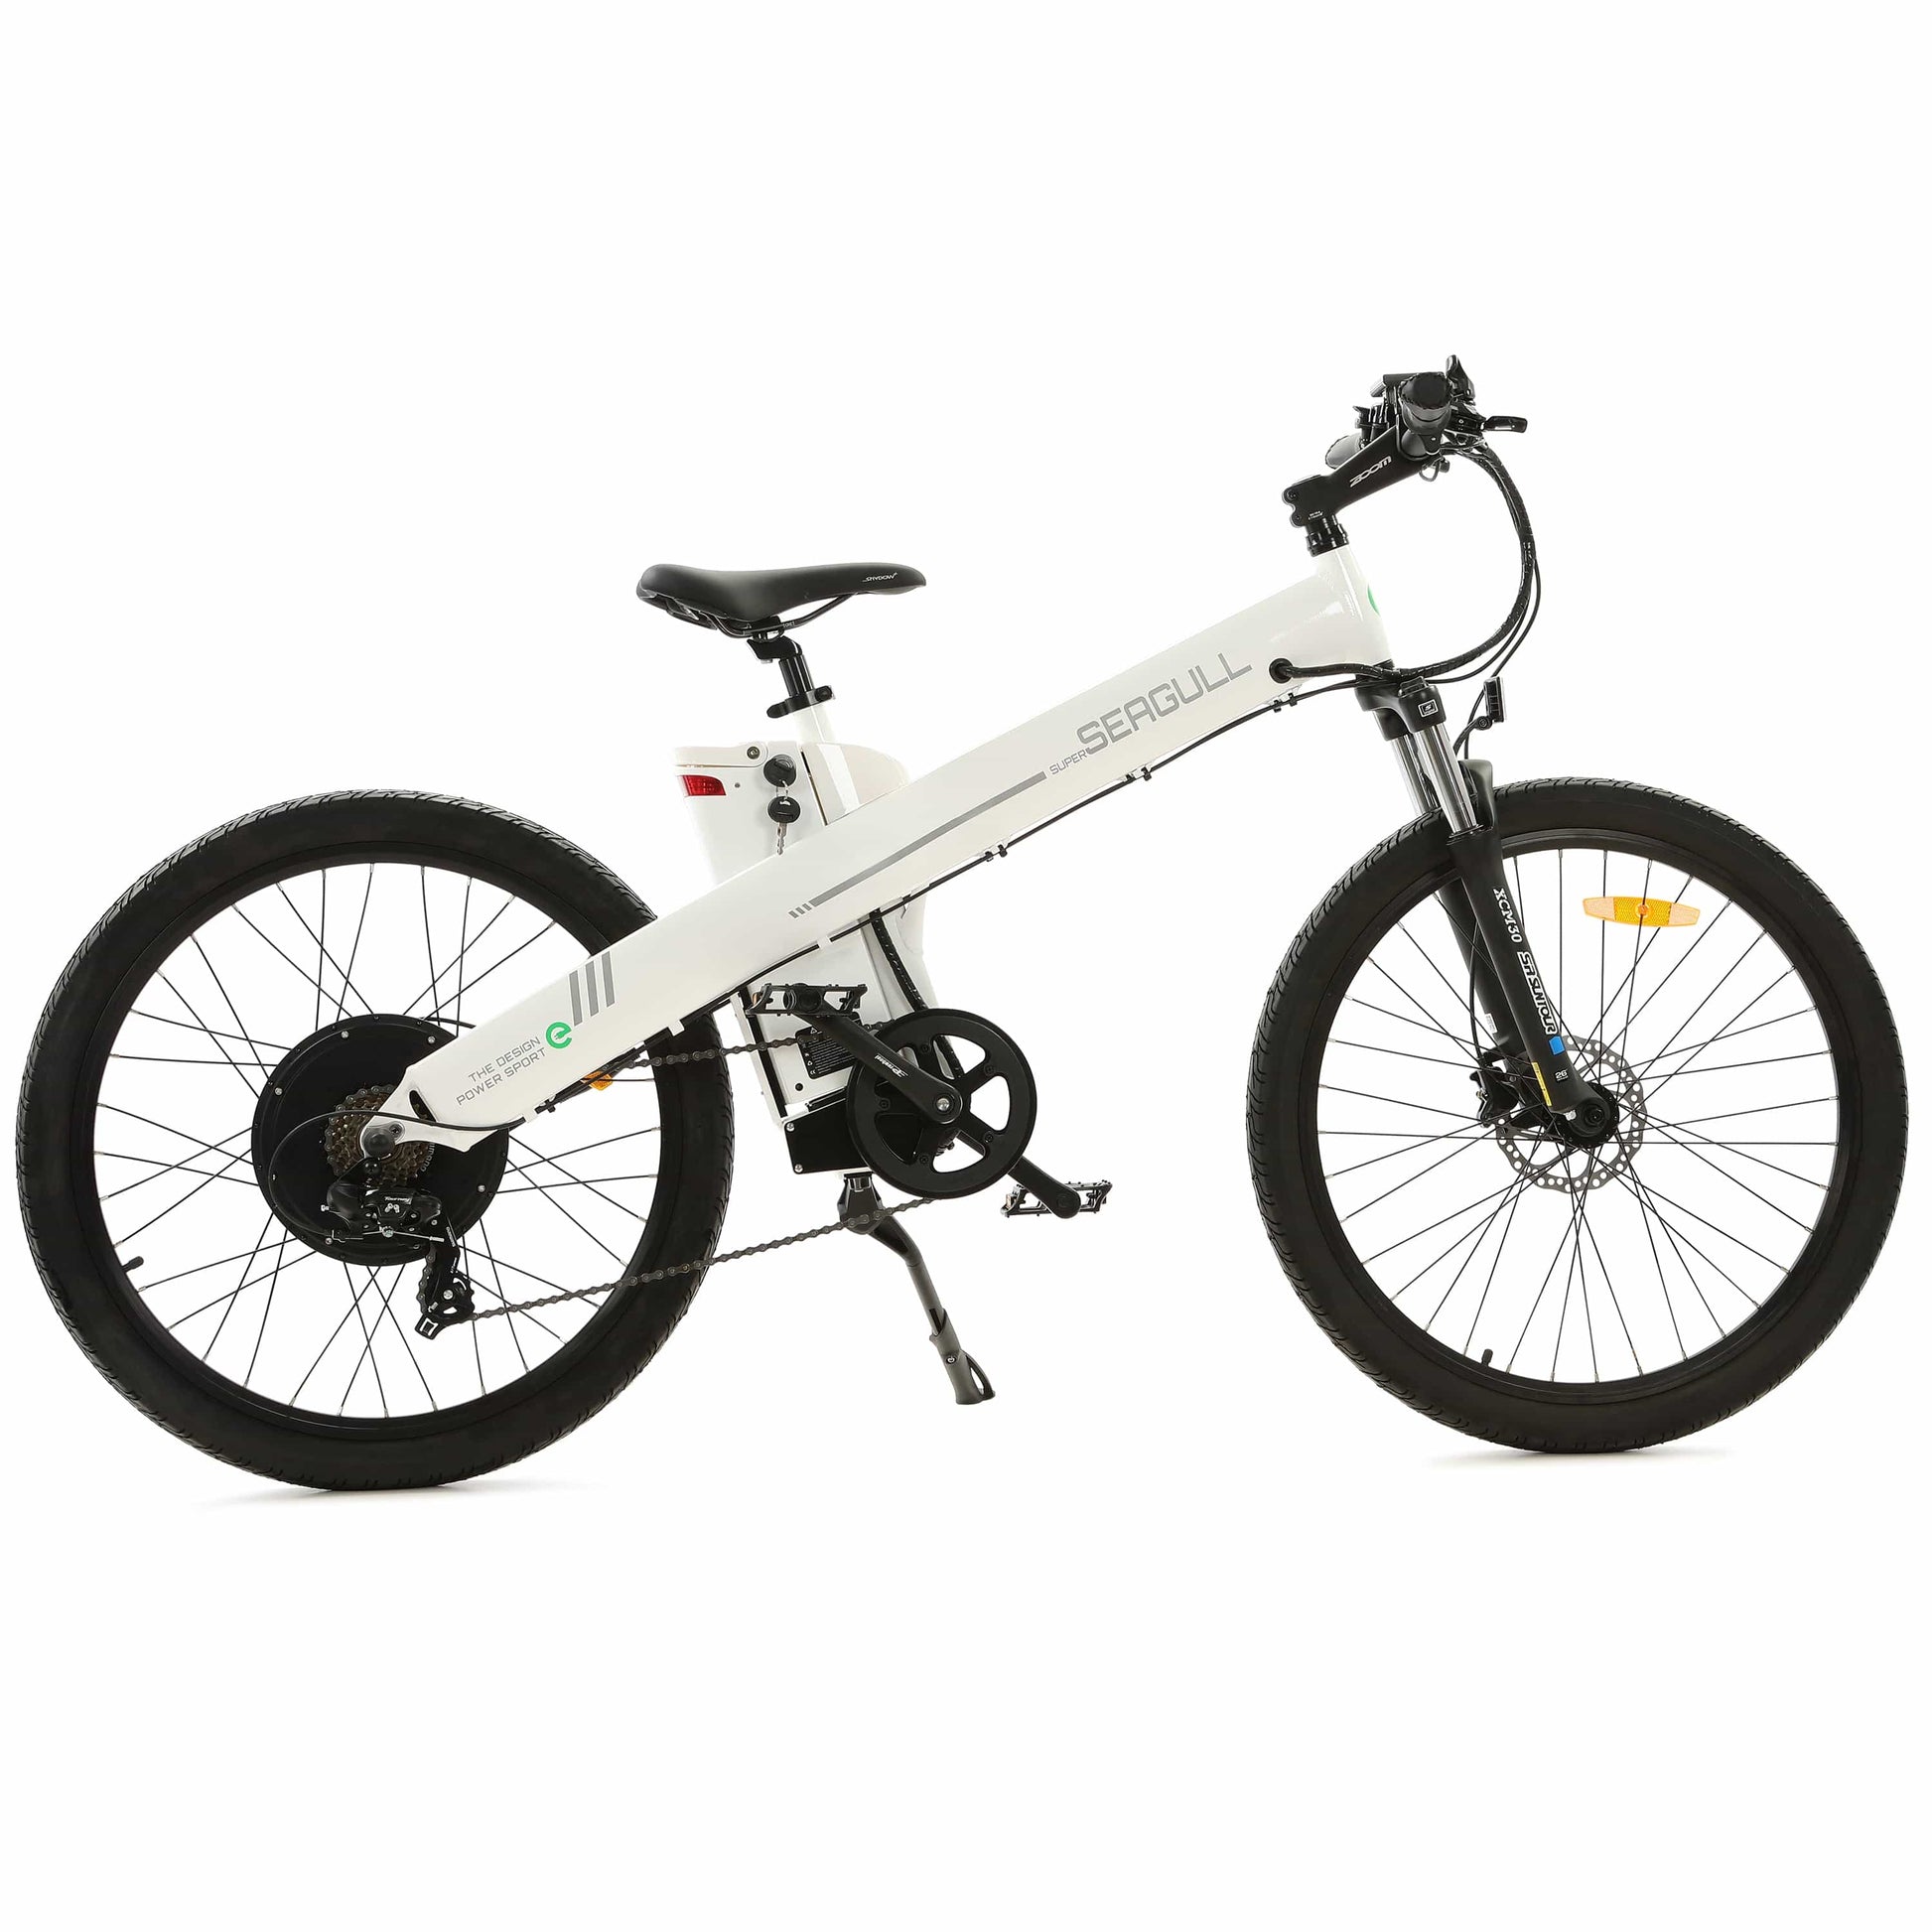 Ecotric ebikes Ecotric Seagull Electric Mountain Bicycle